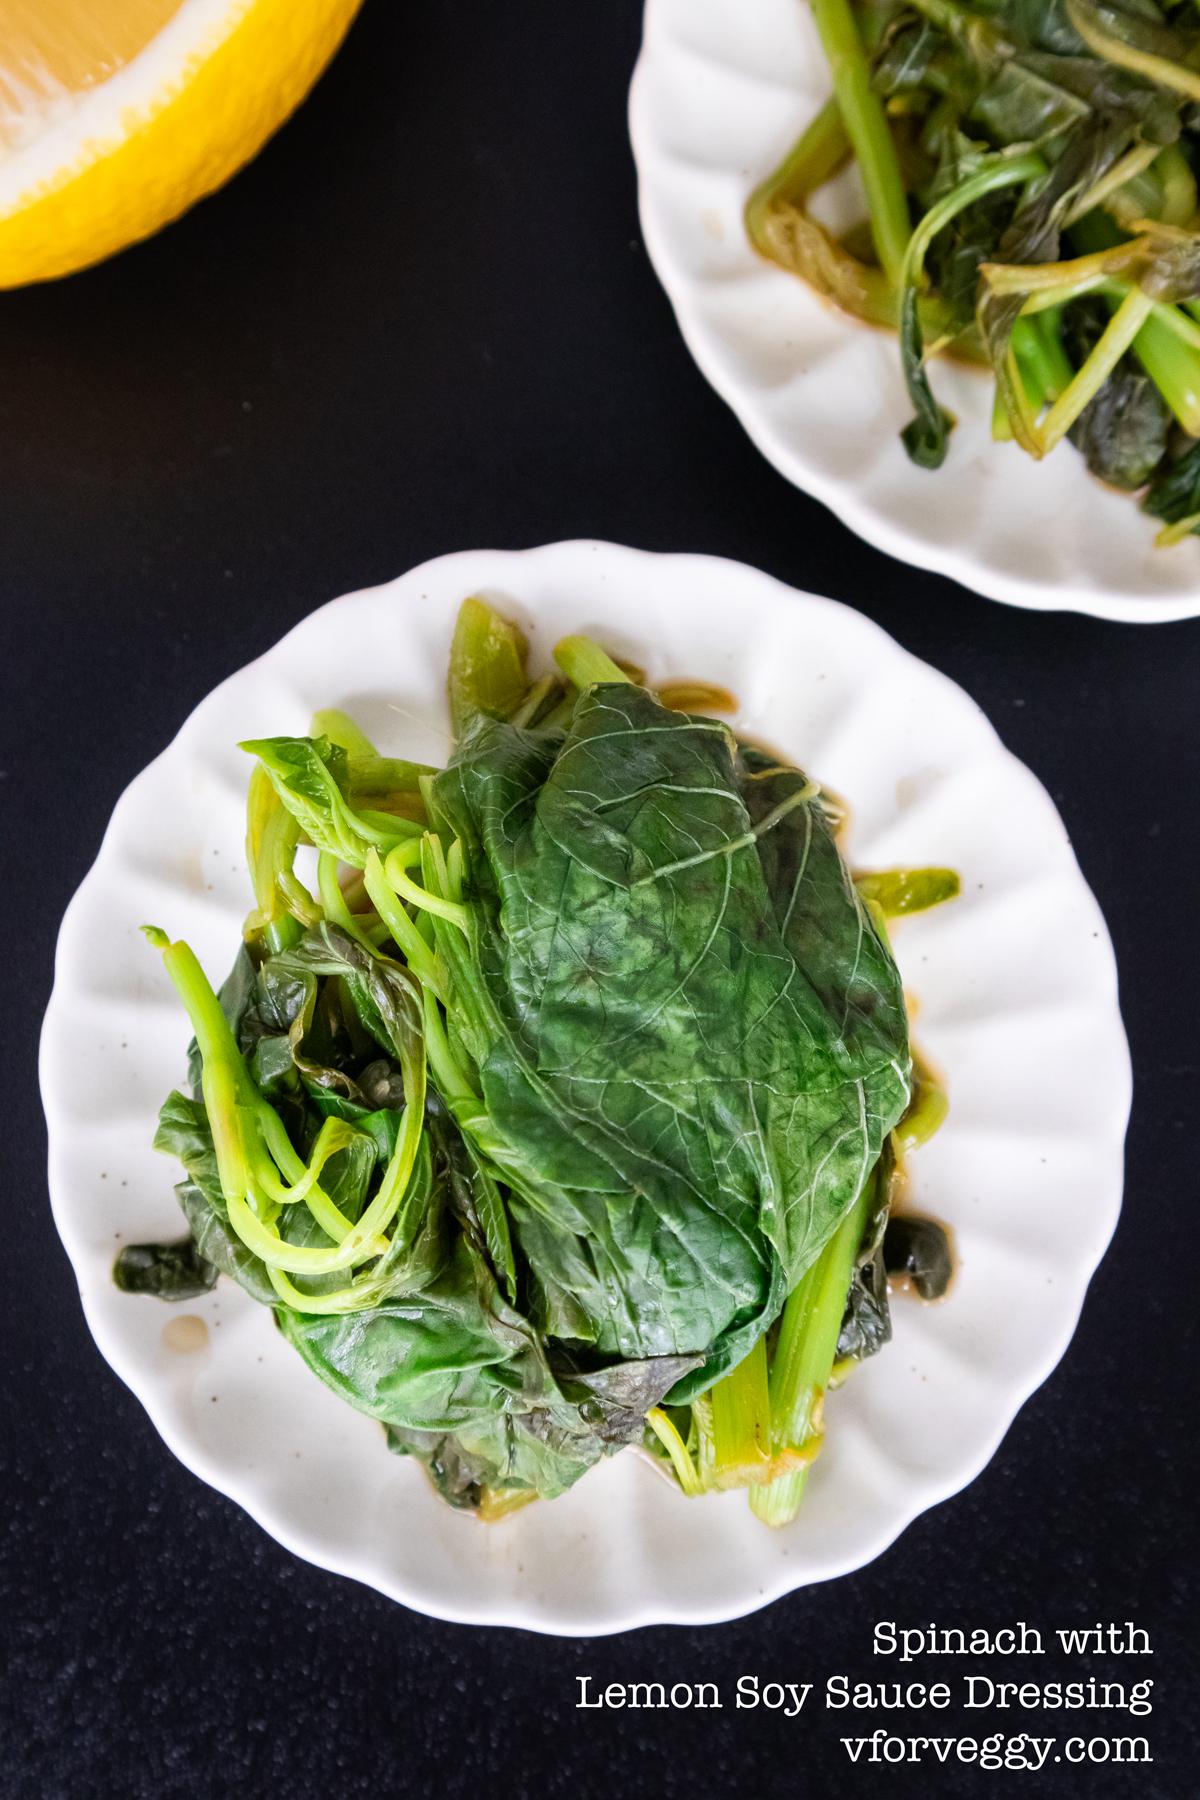 Spinach with Lemon Soy Sauce Dressing.